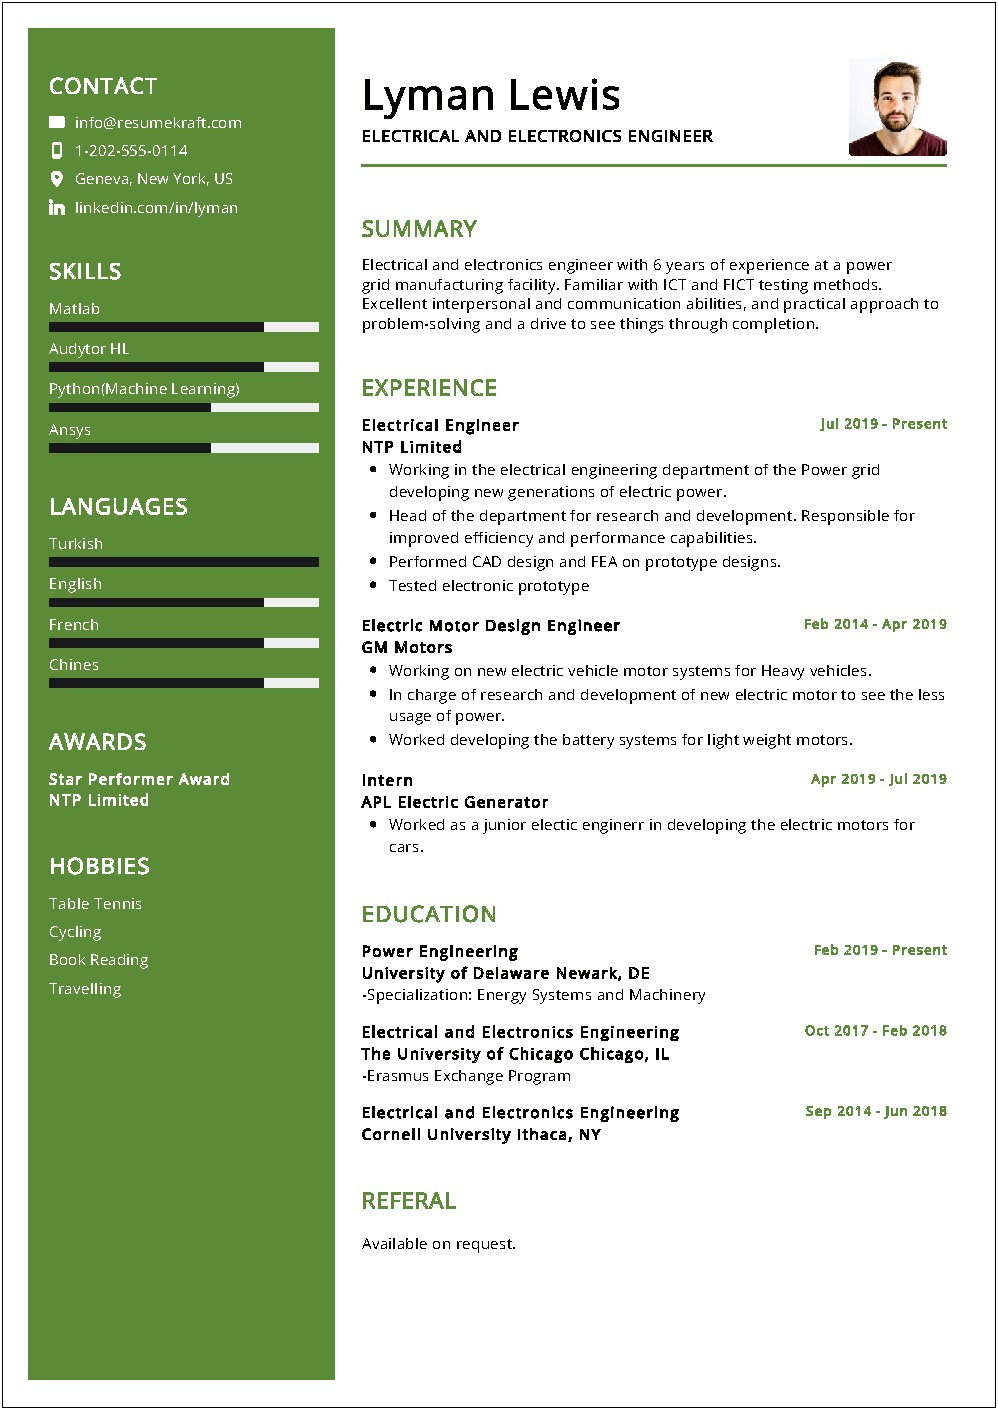 Electrical Engineering Technologist Resume Objective